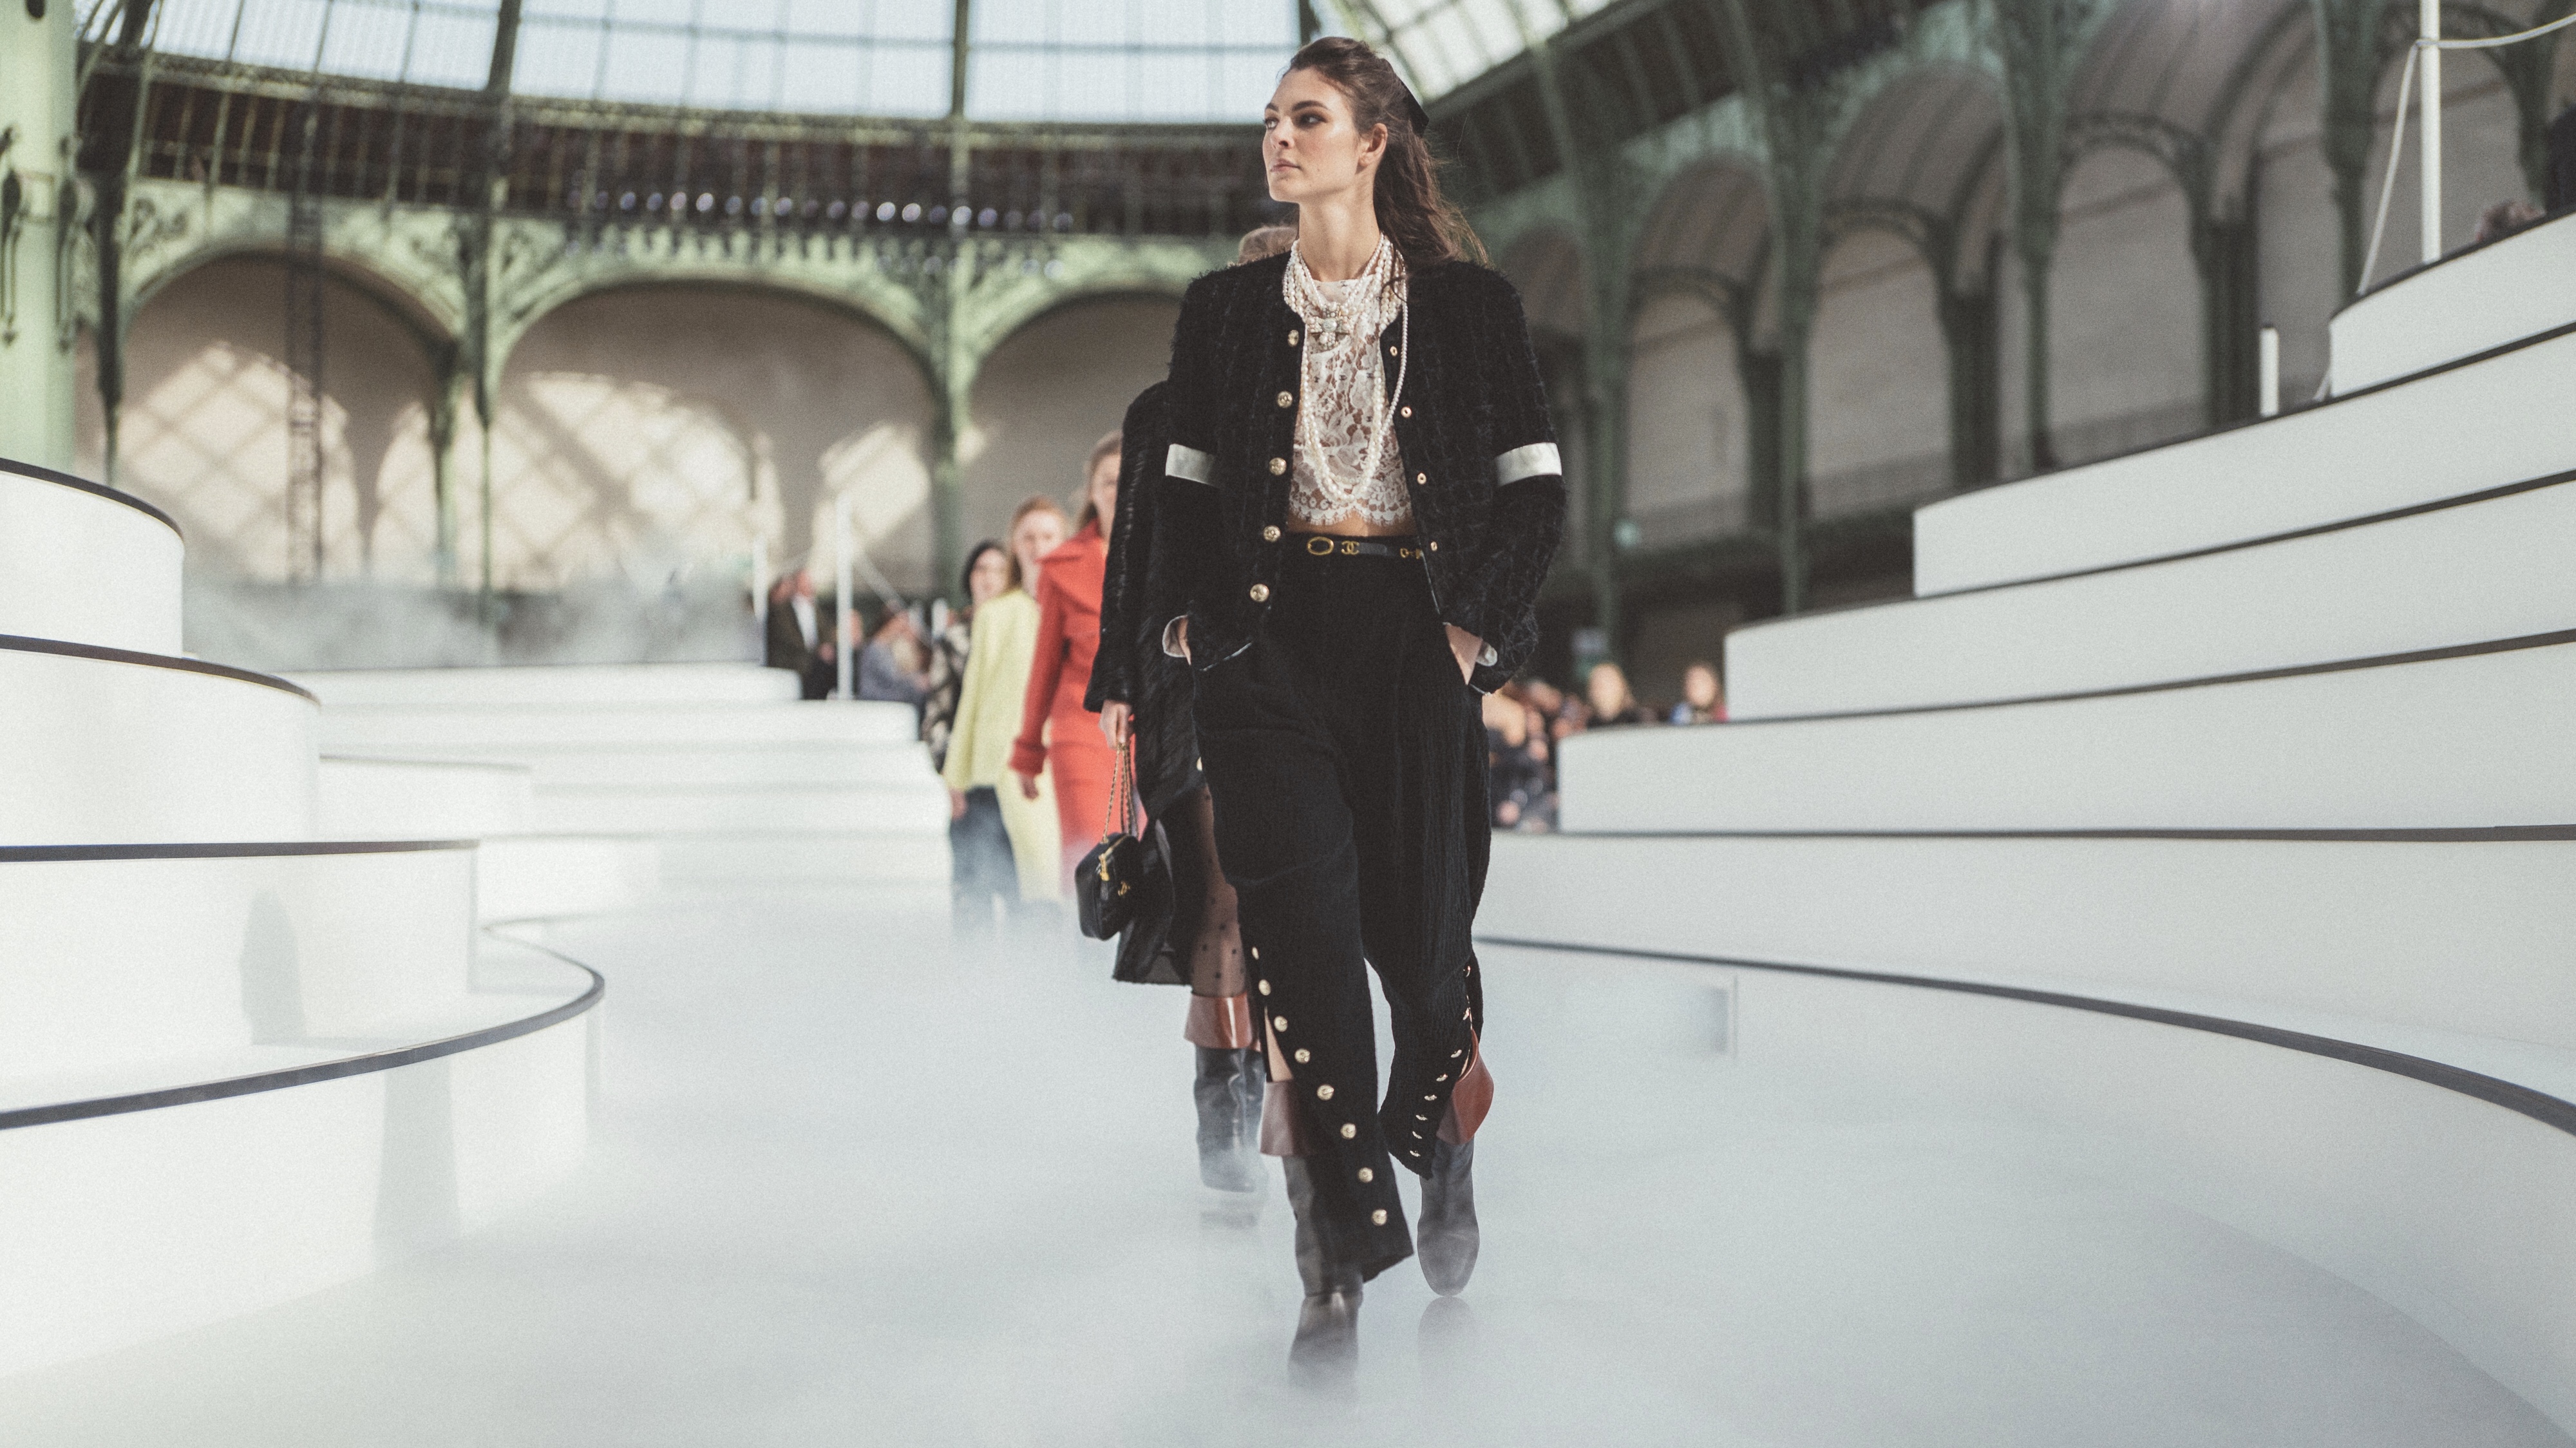 Chanel Fall / Winter 2020/21 Ready-to-Wear Collection